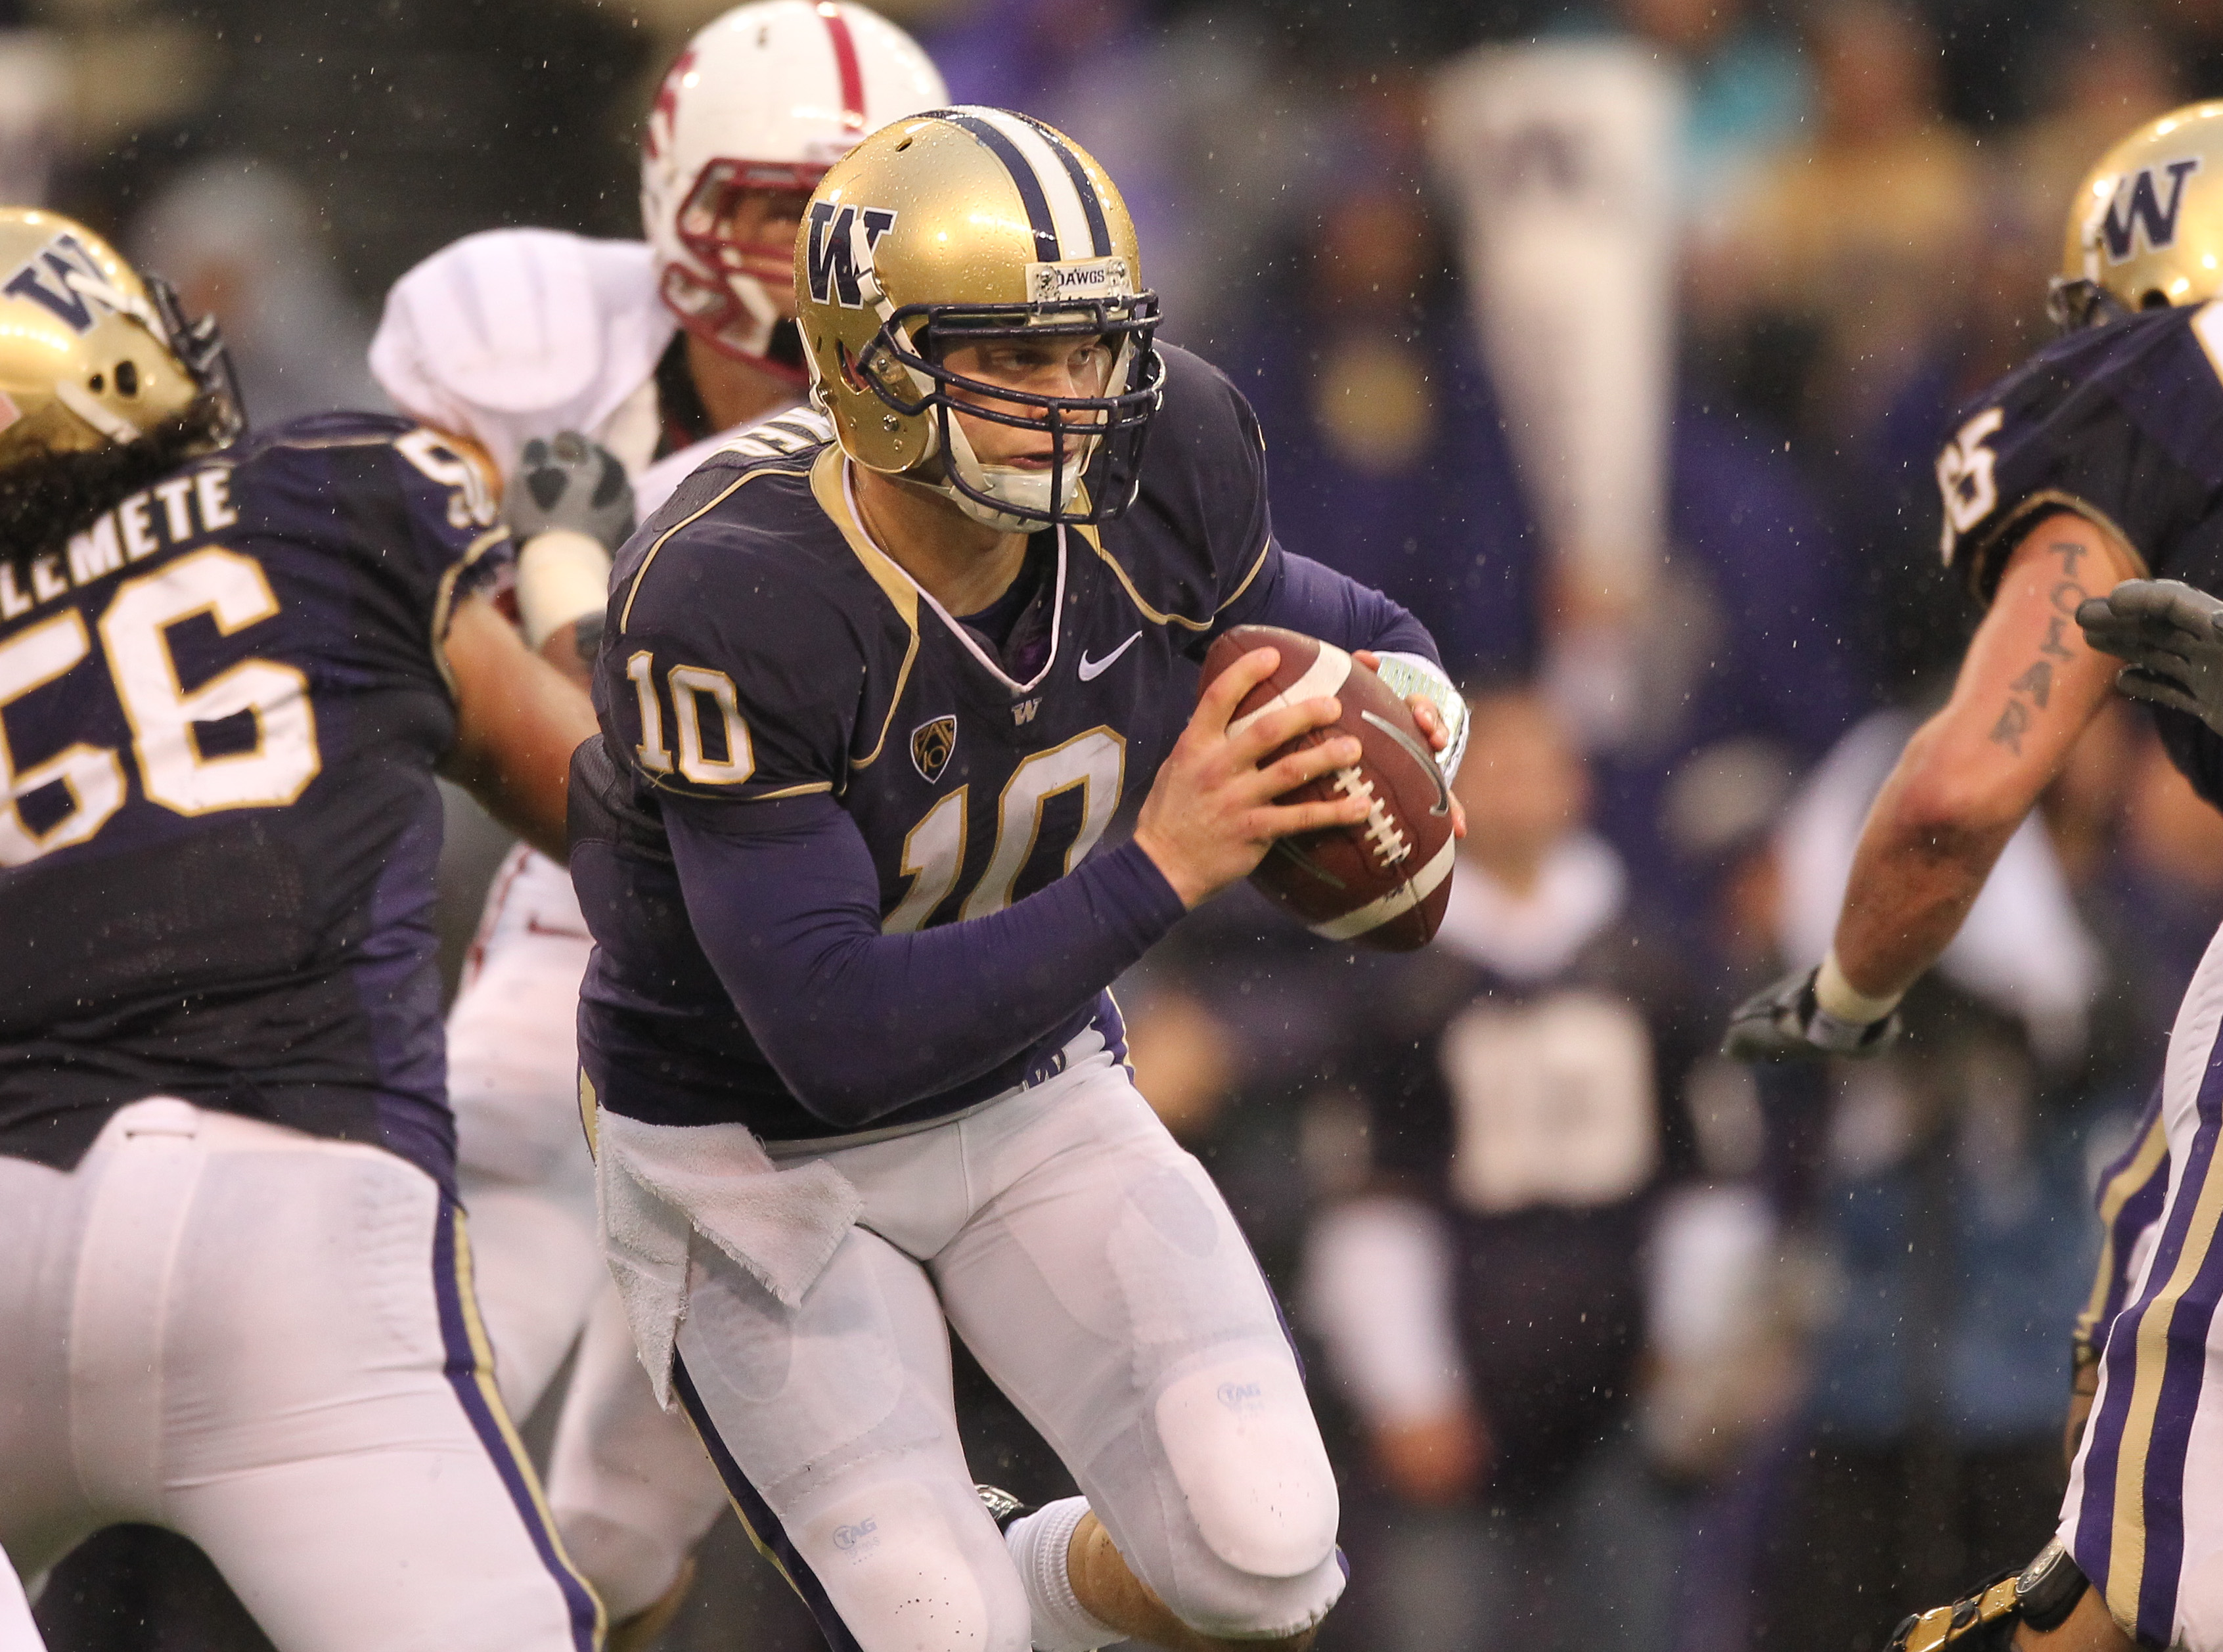 Washington QB Jake Locker is the man with the golden arm and feet